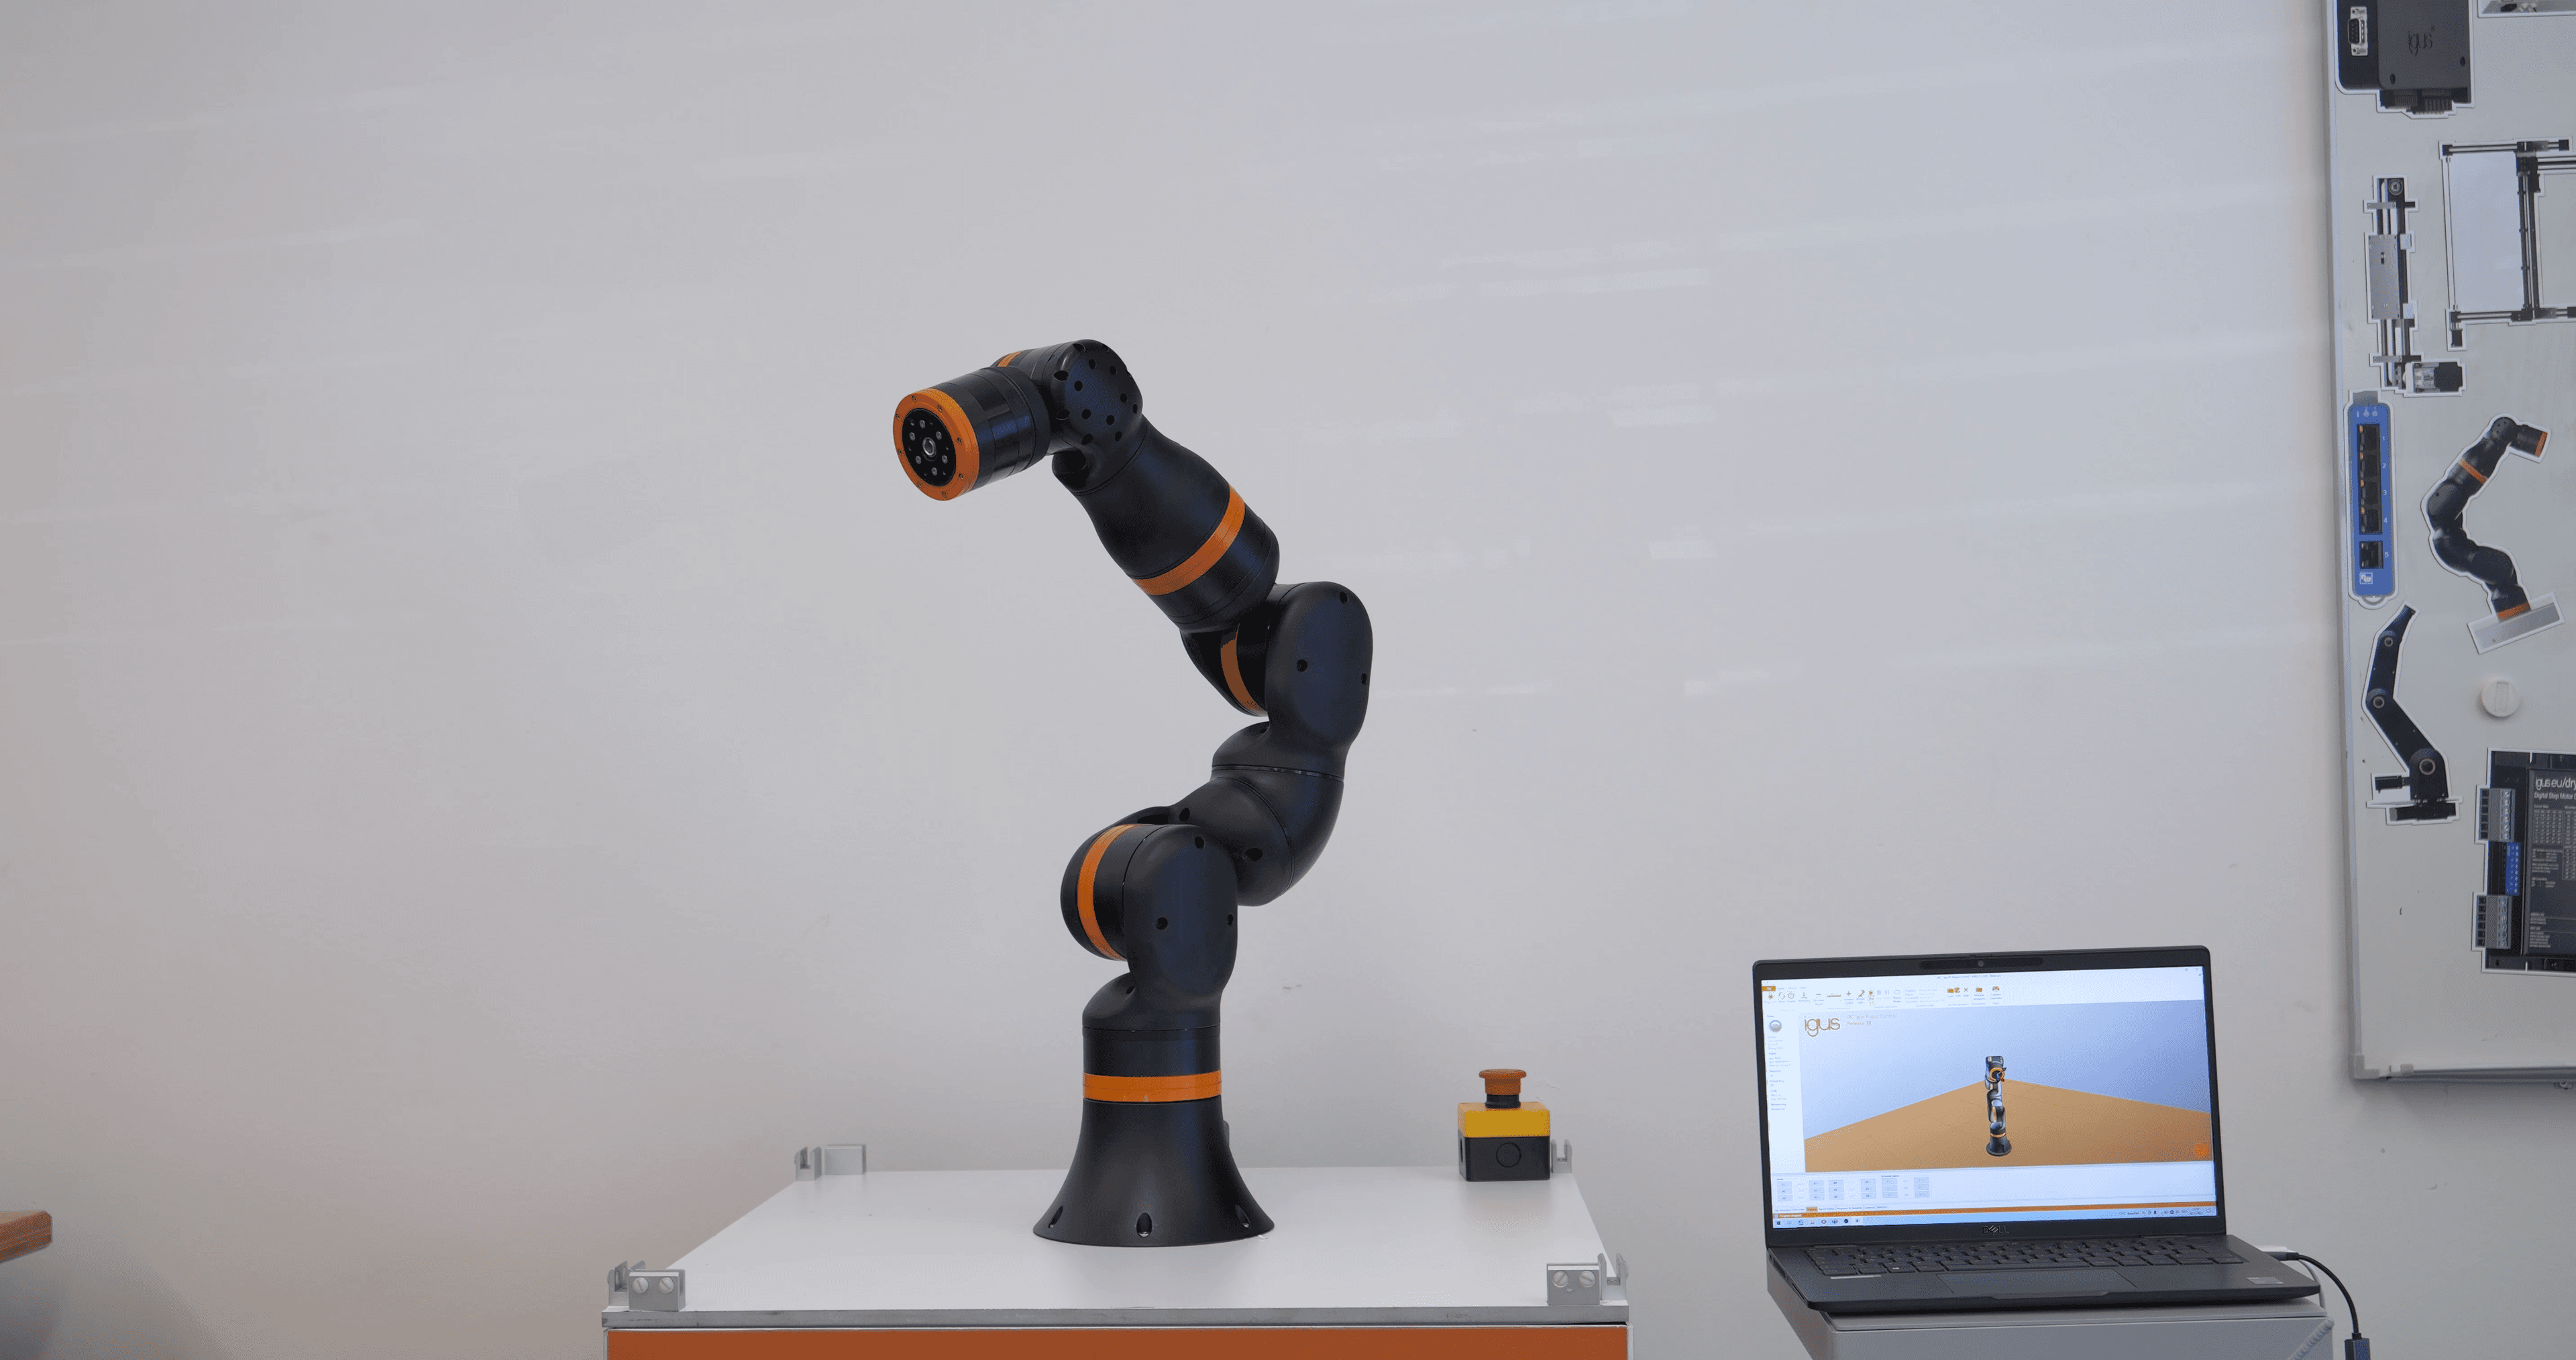 ReBeL 6-axis robot pick and place accuracy test